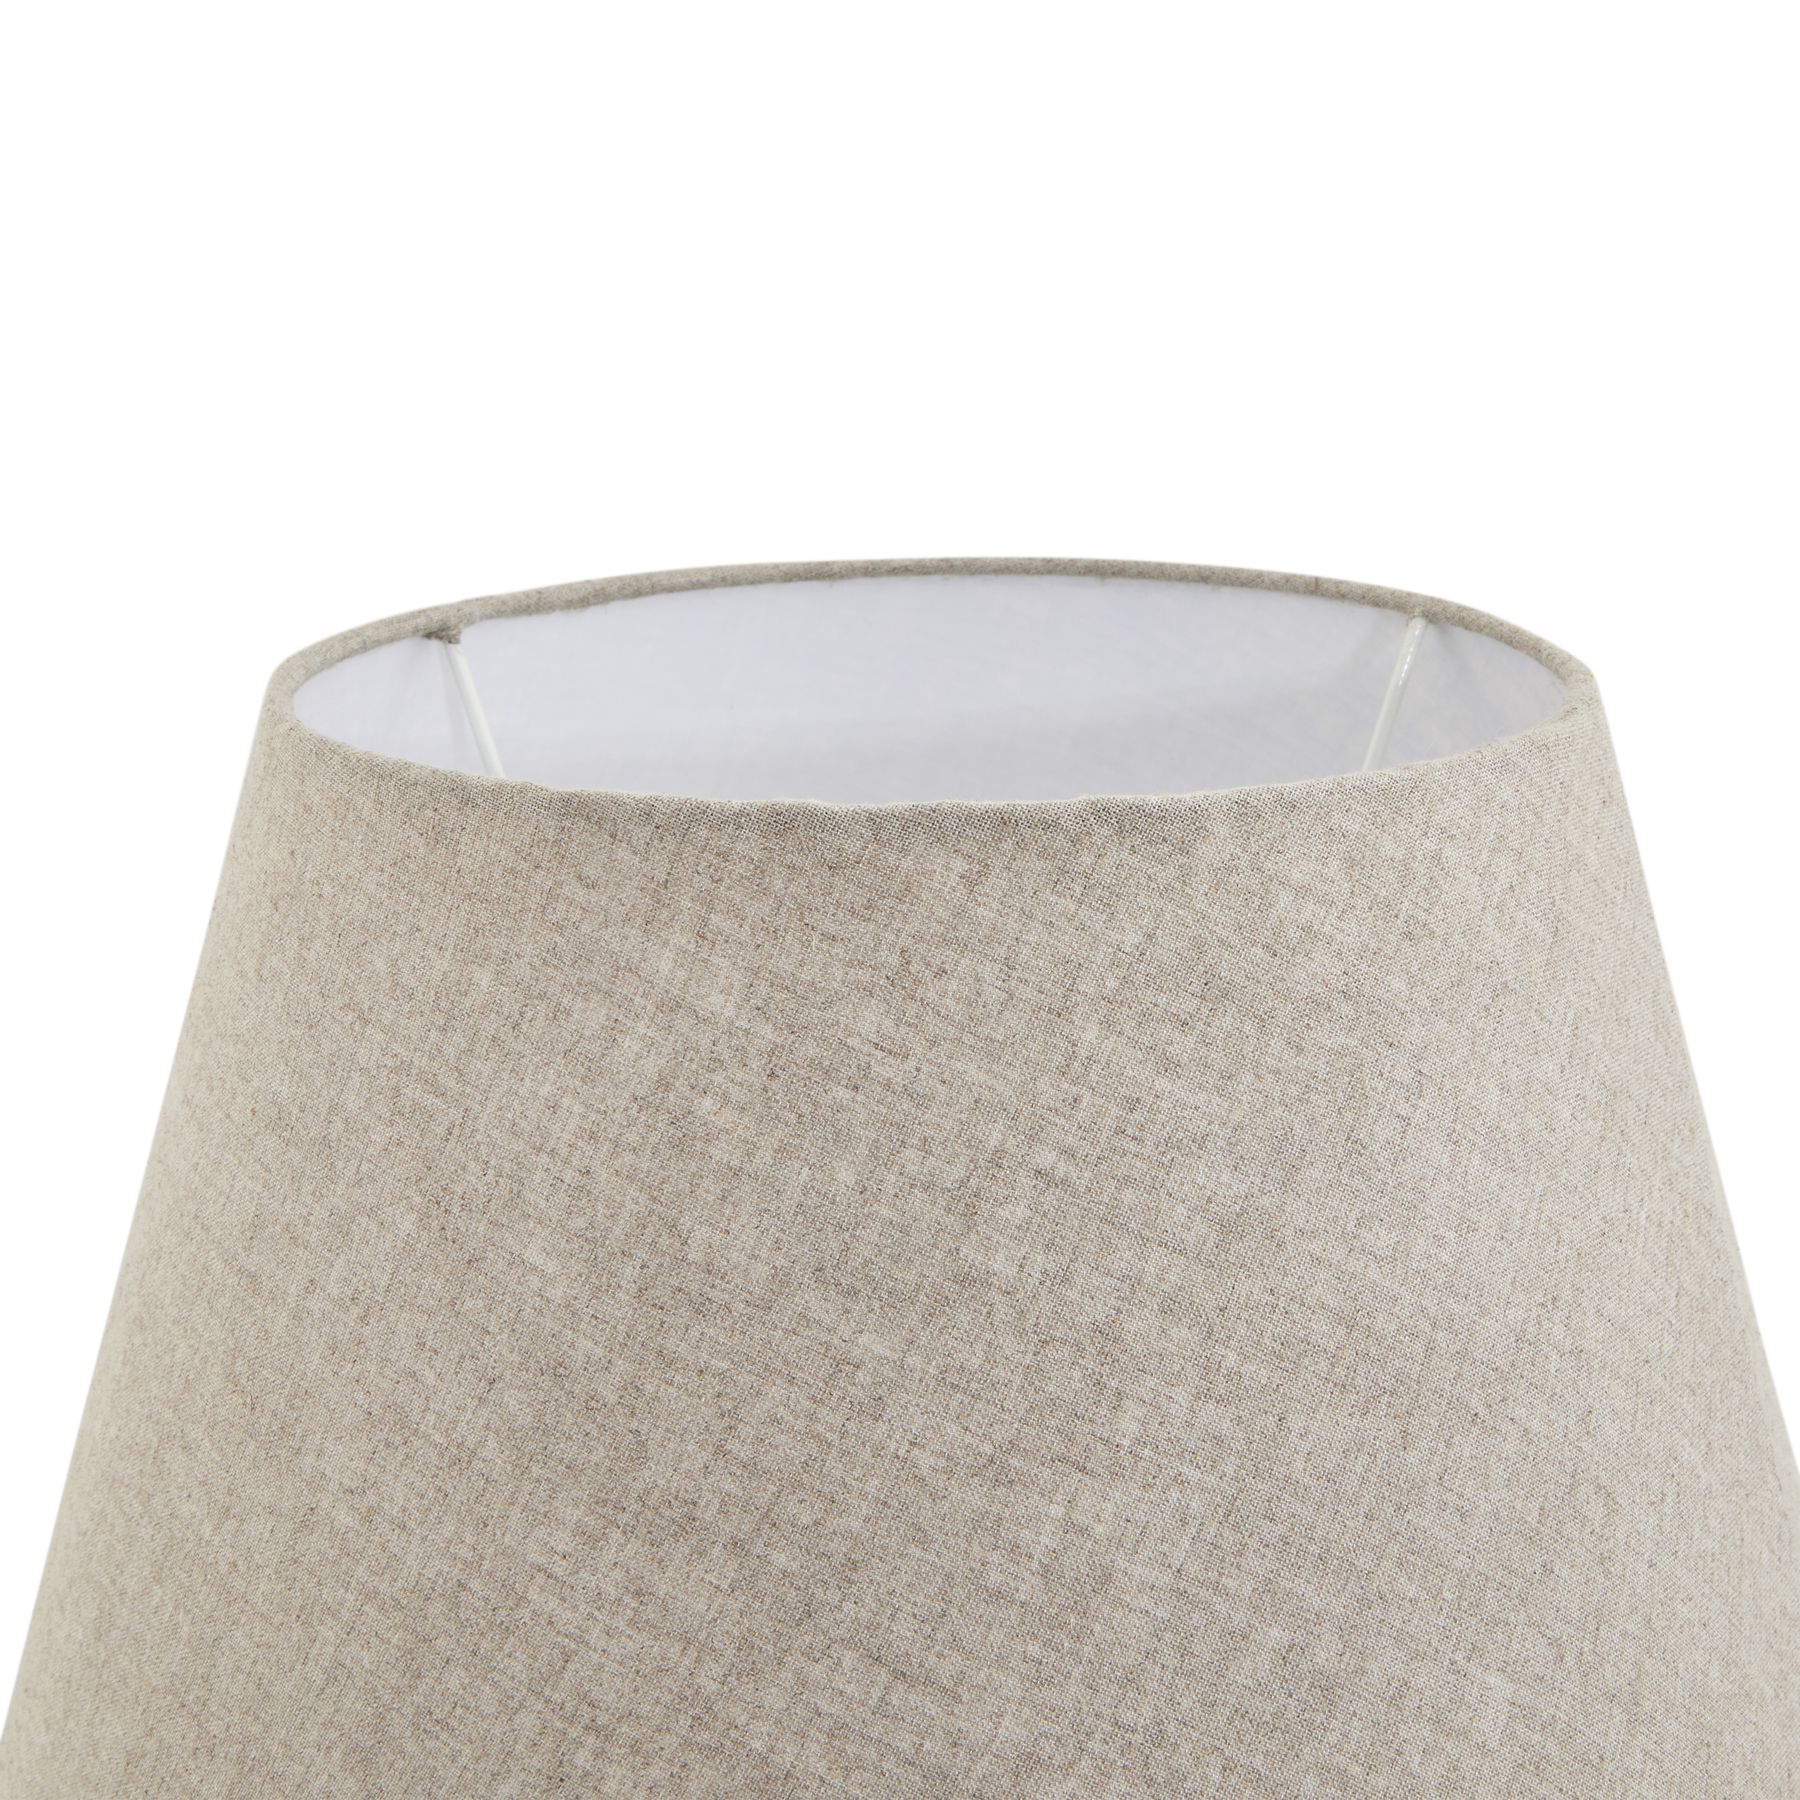 Amalfi Grey Candlestick Table Lamp With Linen Shade - Image 3